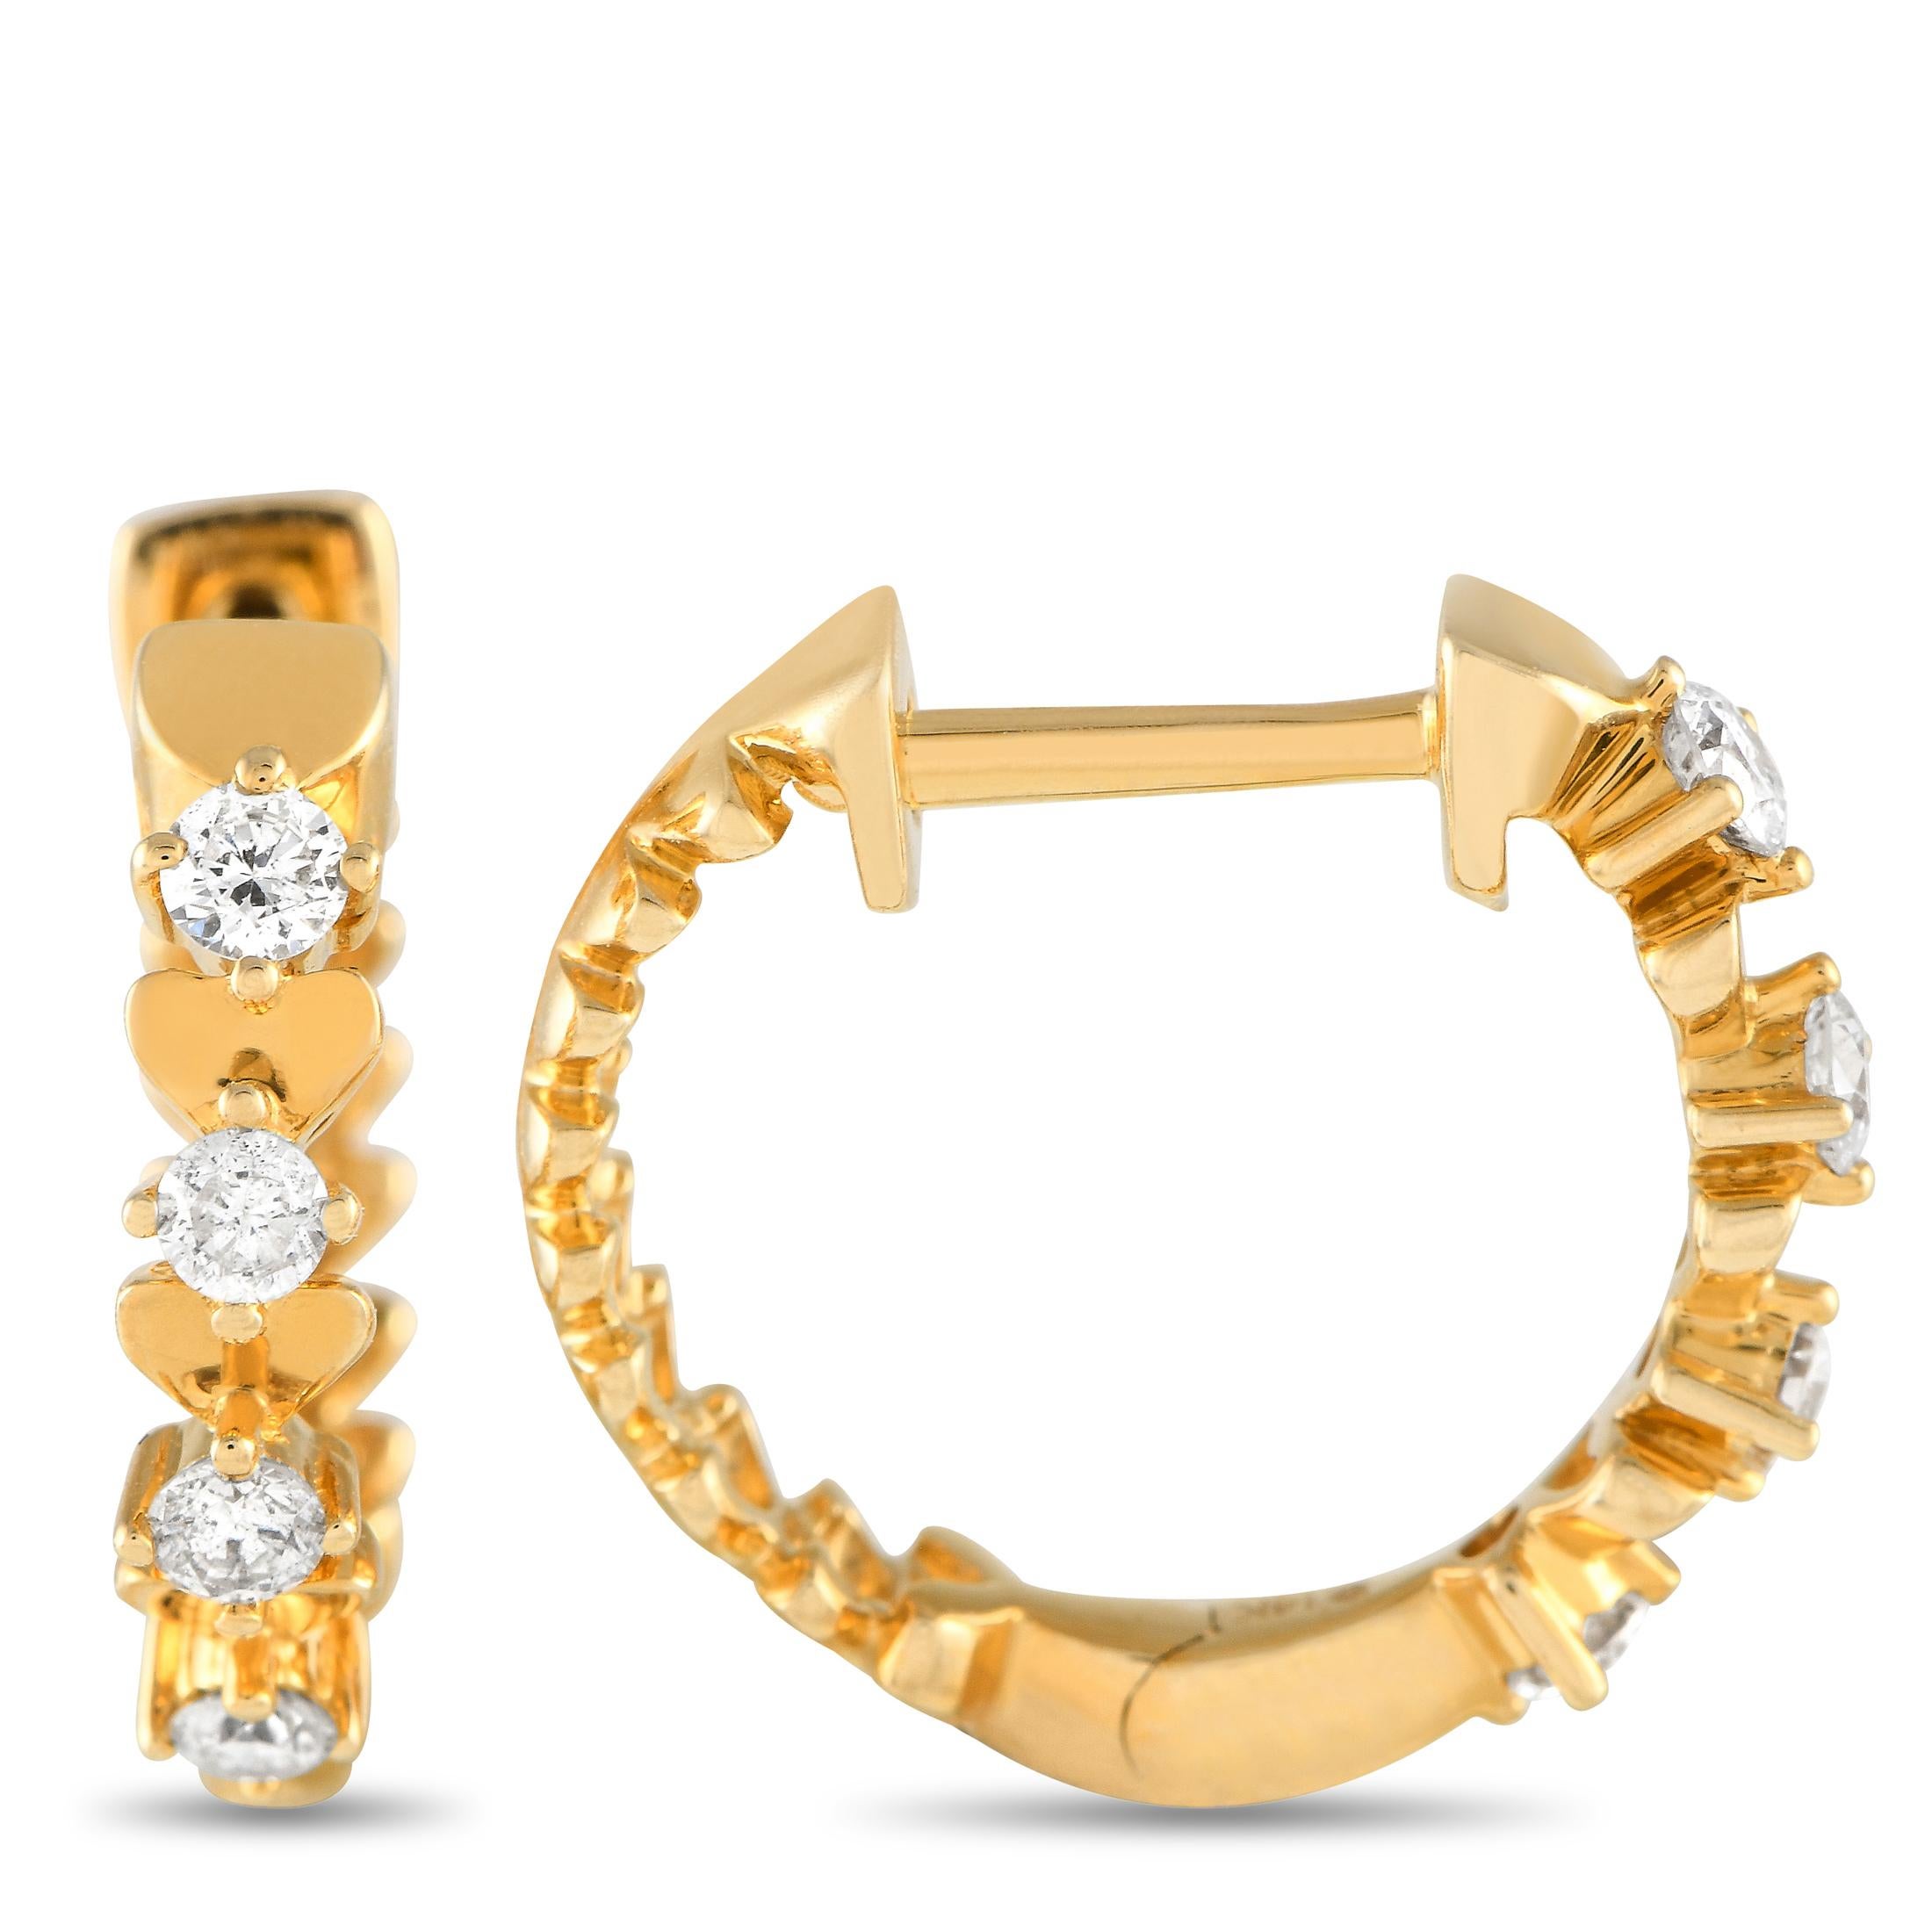 Diamonds with a total weight of 0.25 carats make these hoop earrings simply unforgettable. Each one of these elegant earrings features a bold 14K Yellow Gold setting measuring 0.65 round that features subtle heart motifs.This jewelry piece is